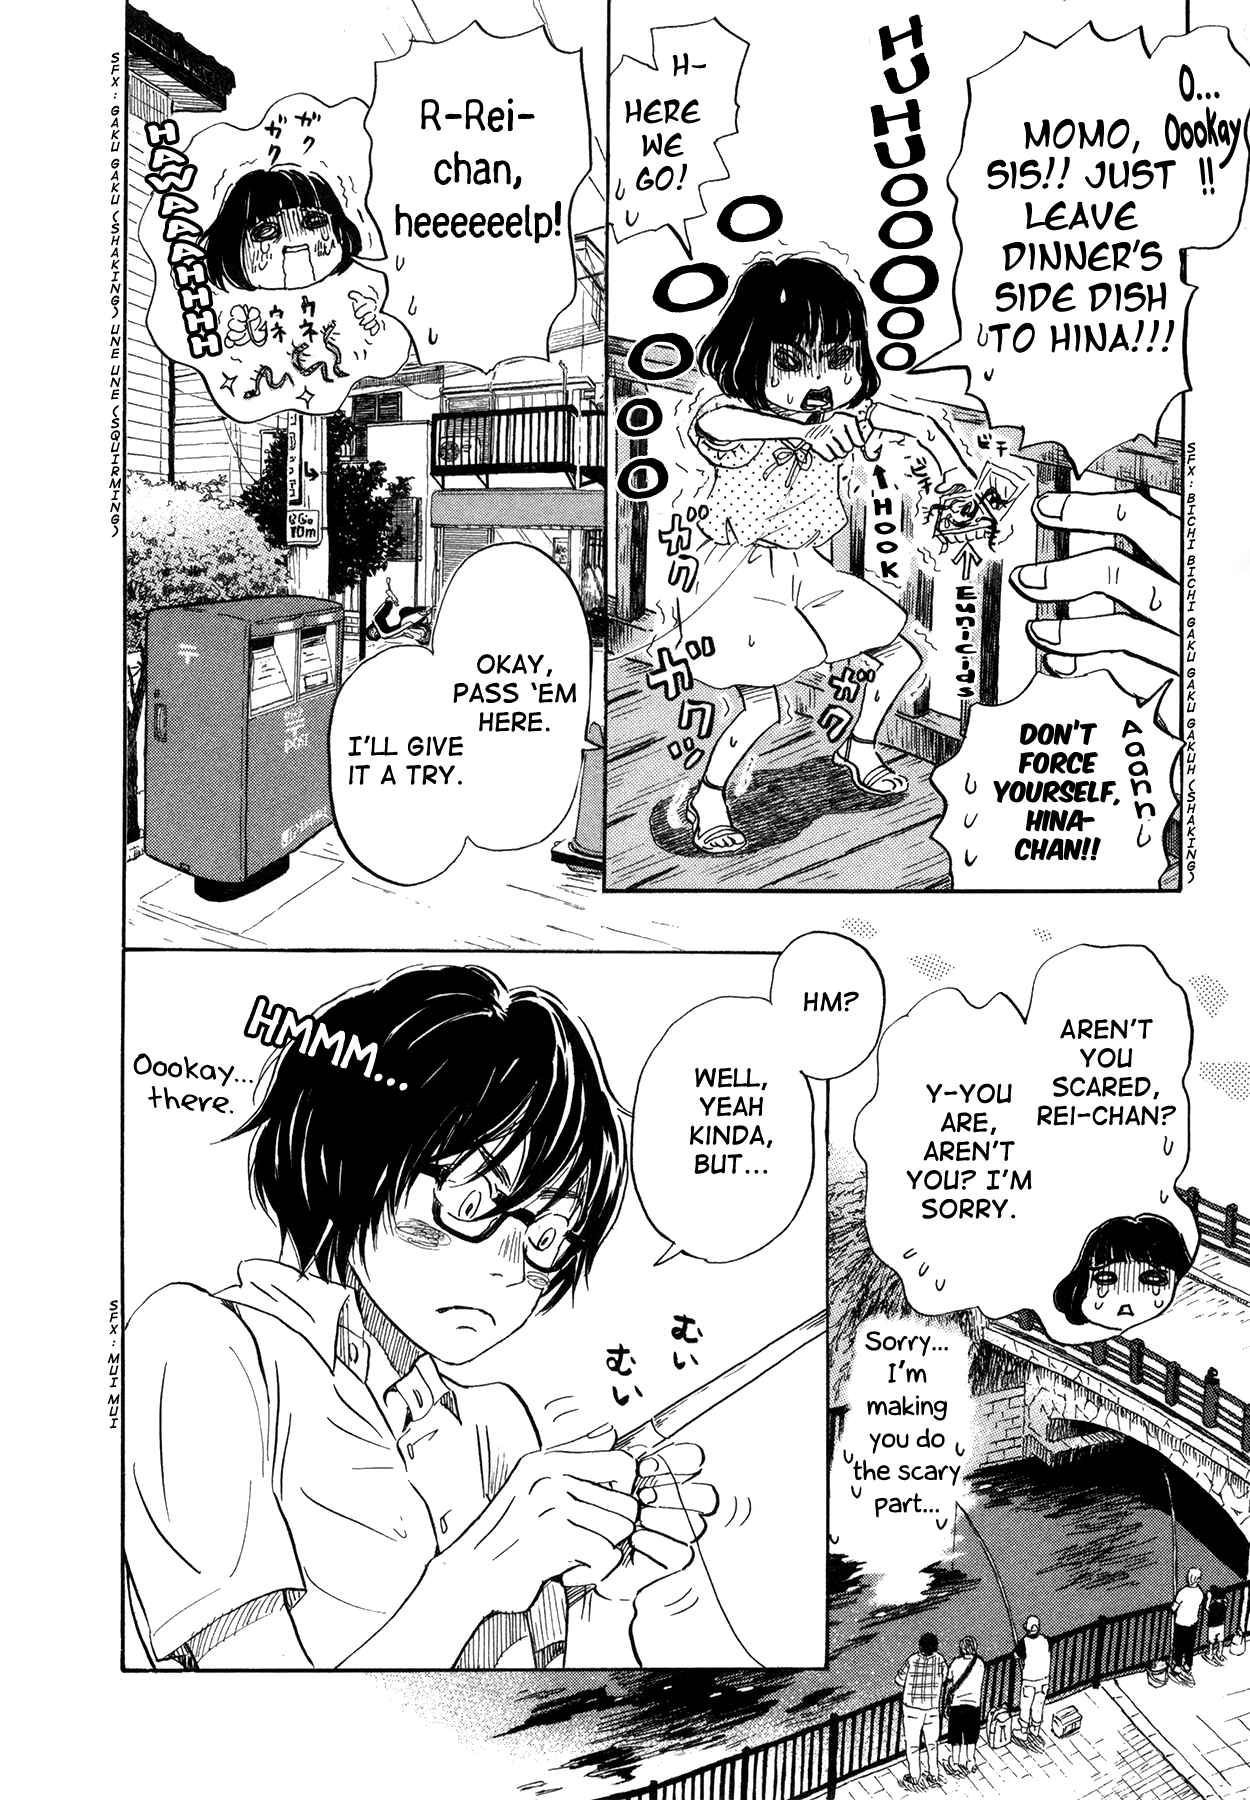 3 Gatsu no Lion Vol. 14 Ch. 144 By the Side of the Red Bridge (2)